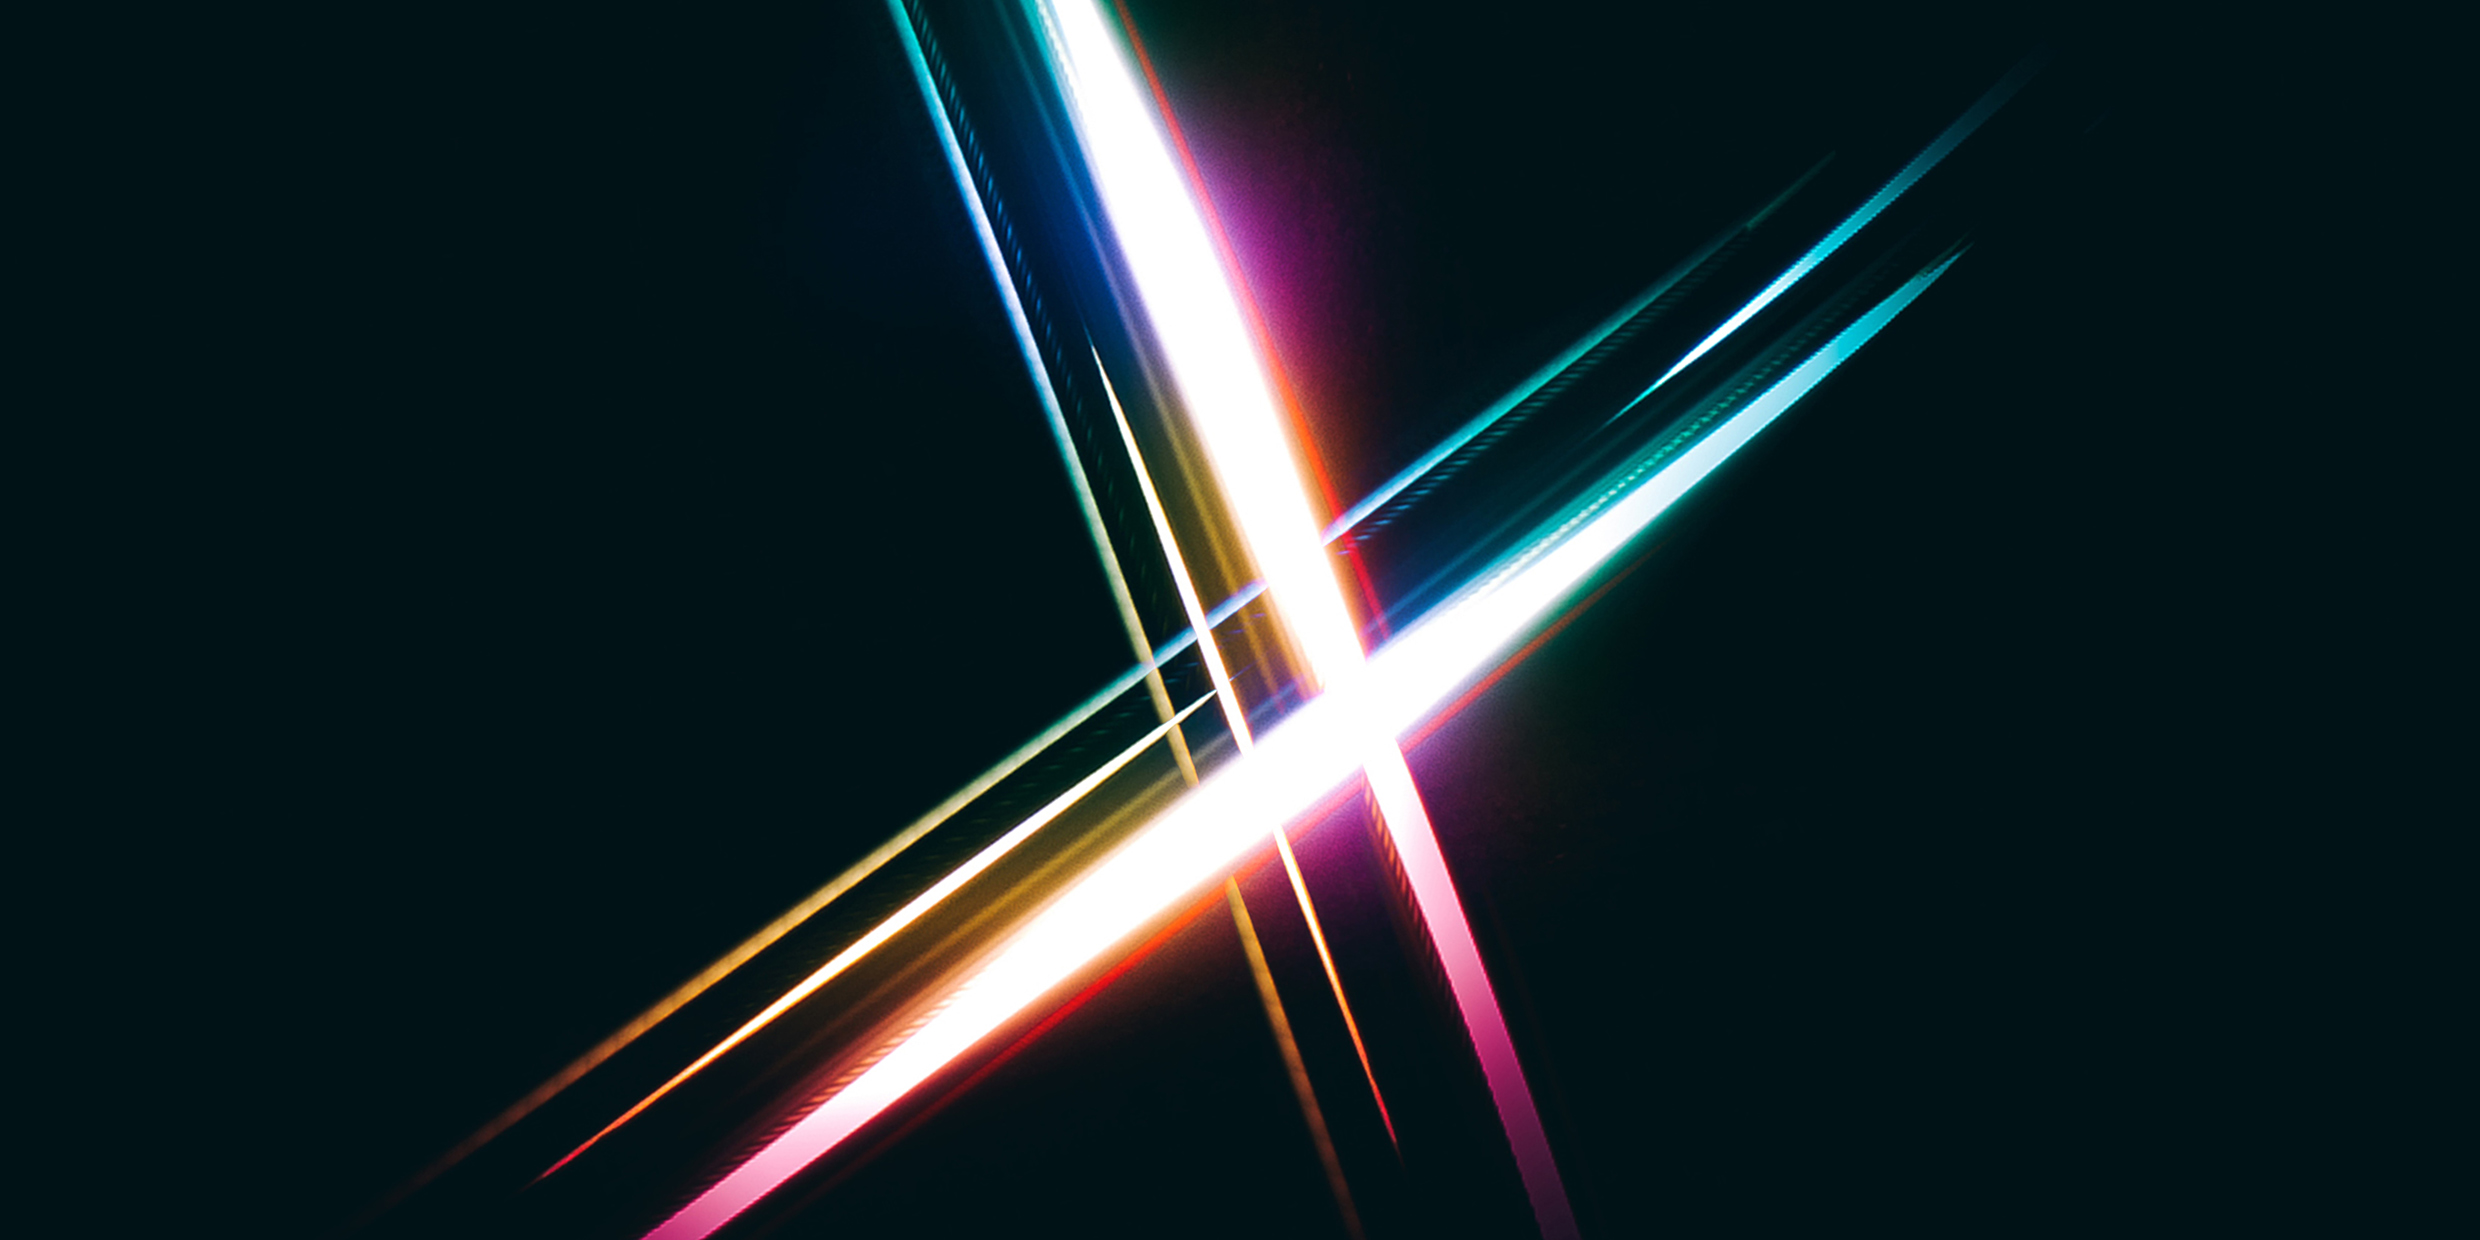 Image of glowing light patterns forming an X over a dark background